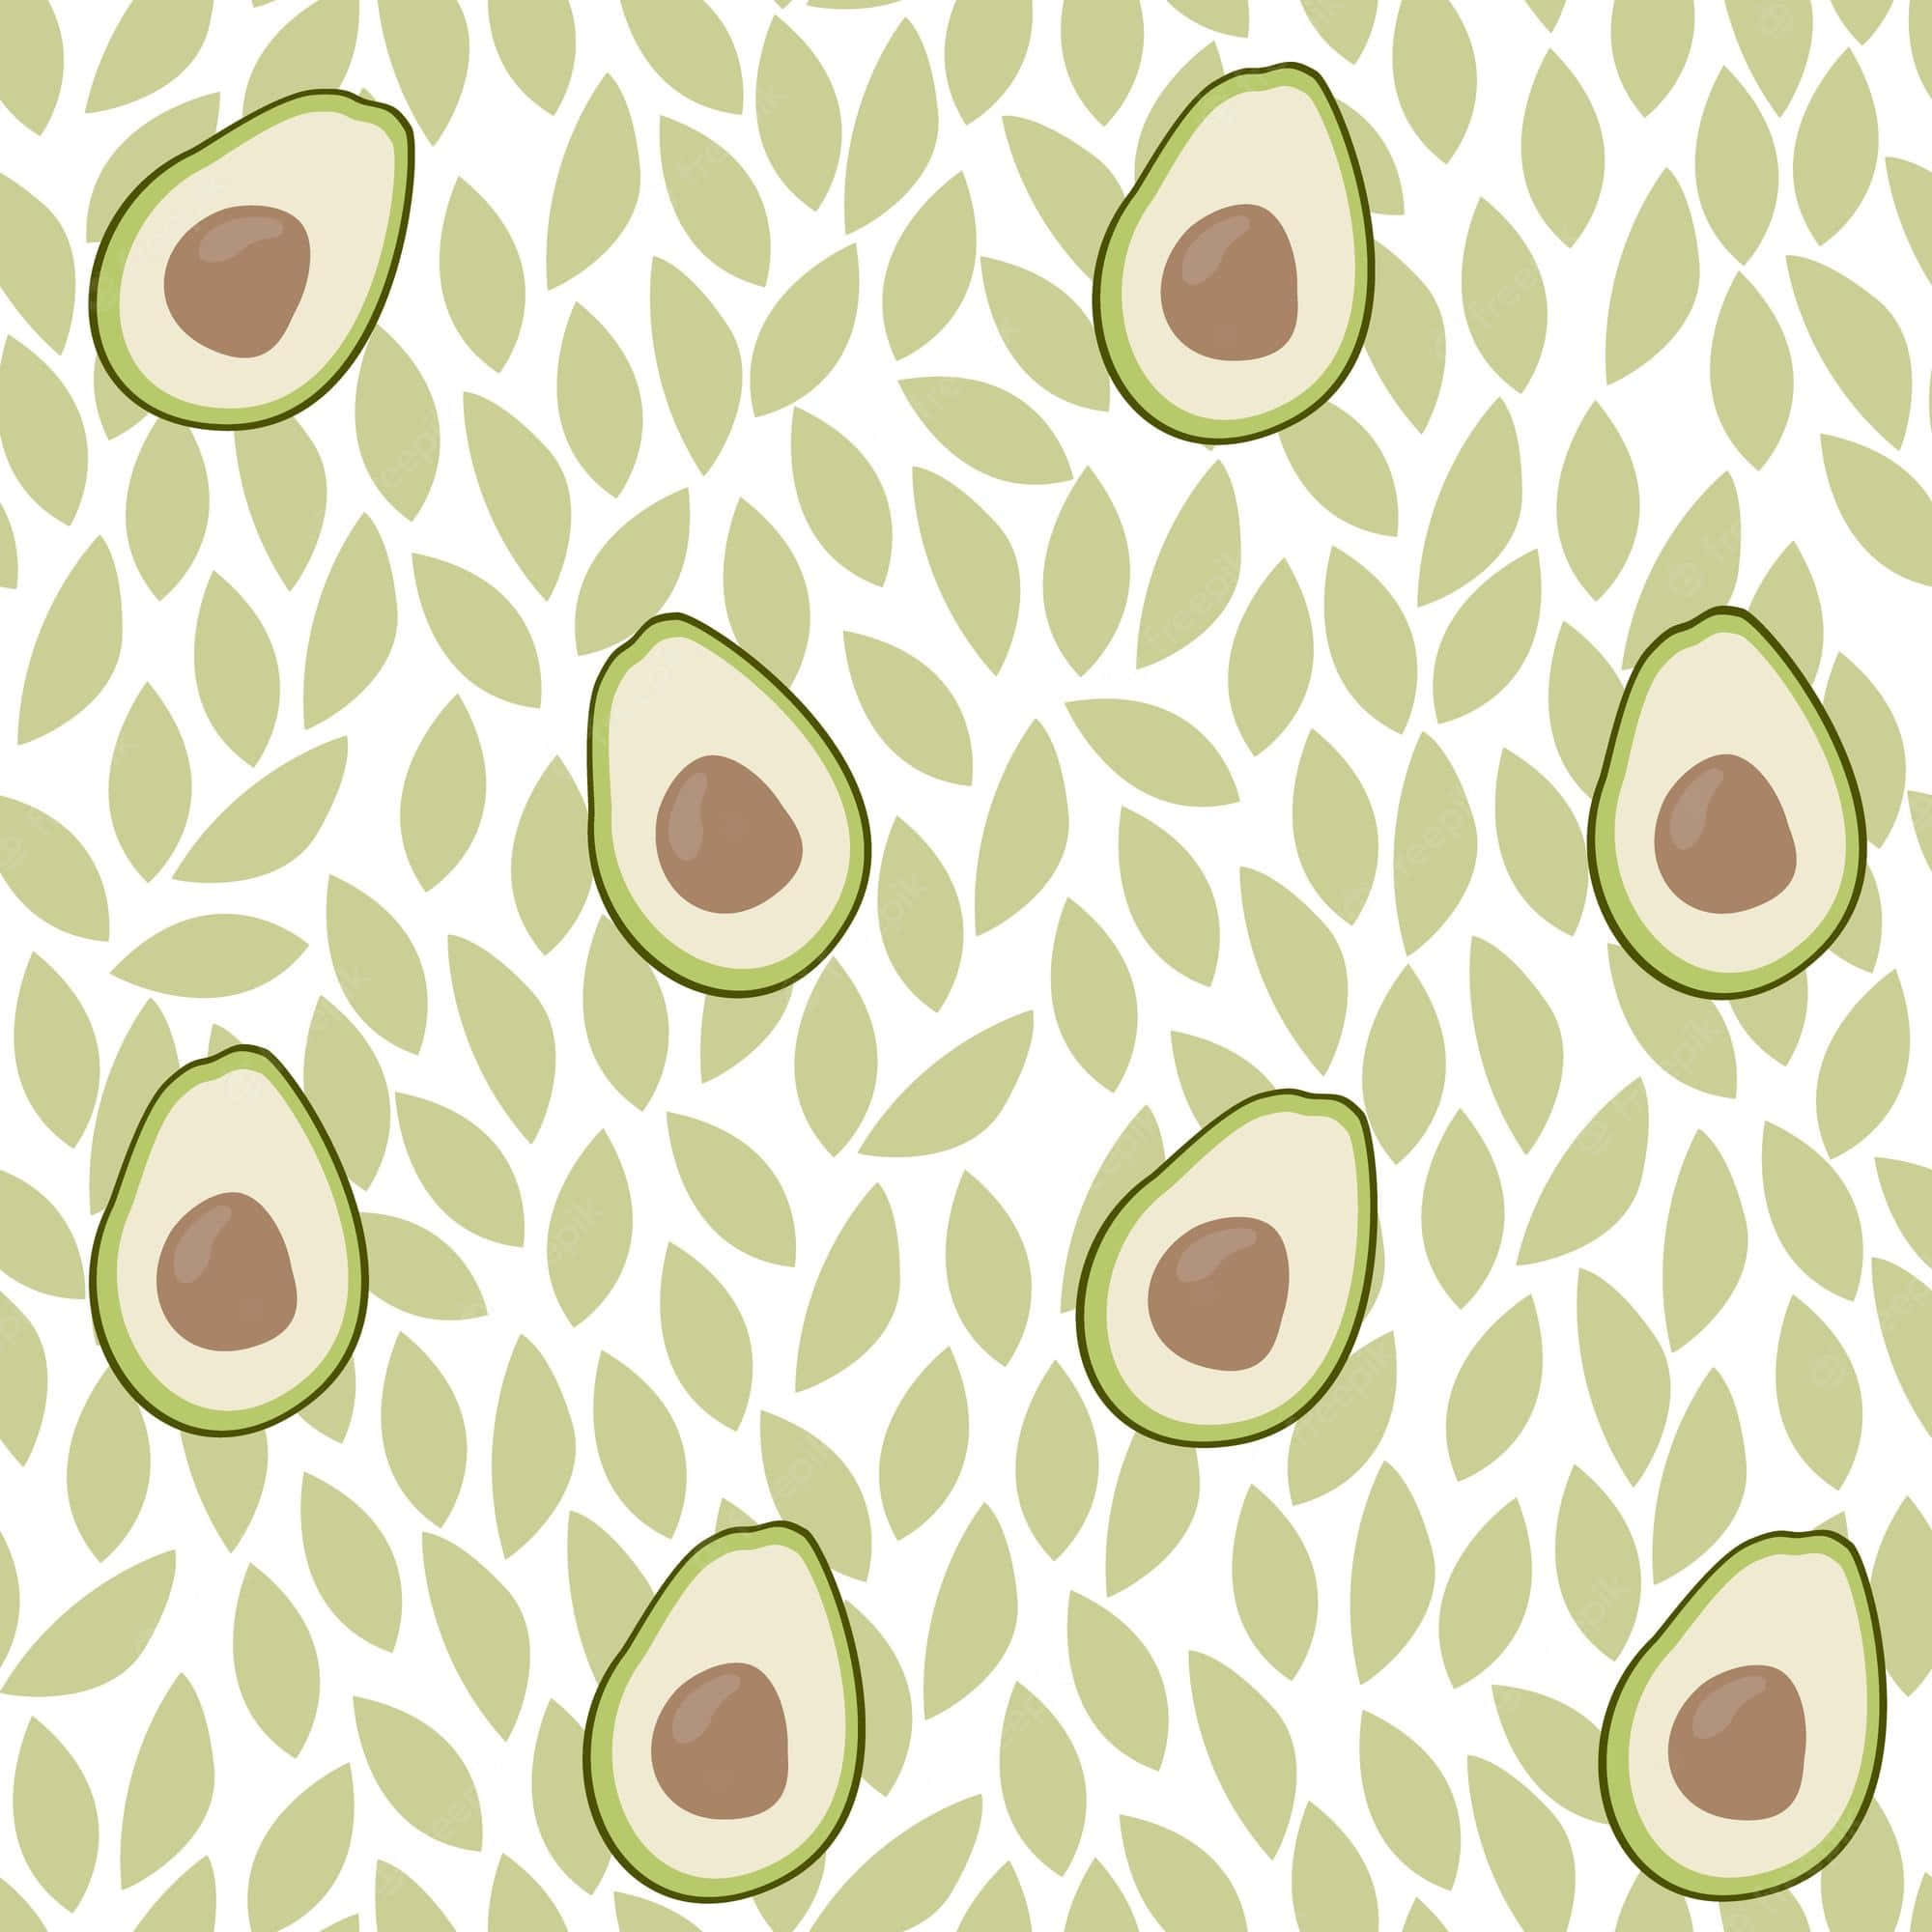 Cute and Lovely Avocado Friends Wallpaper